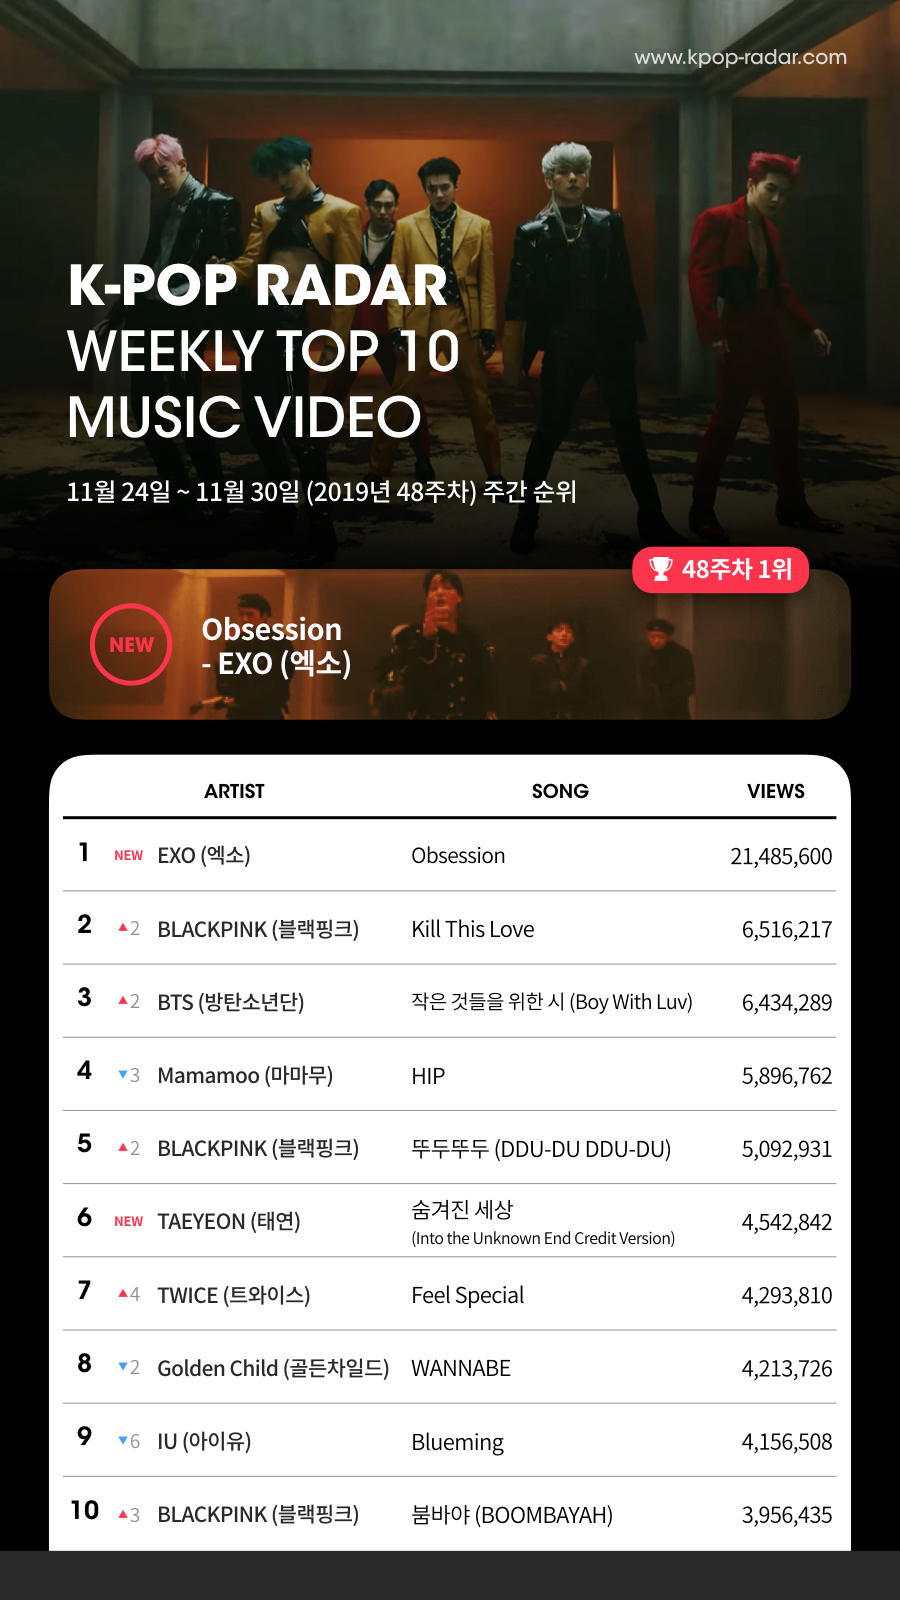 Group EXO topped the Kpop Radar YouTube views chart.ExOs Obsession (Obsession) was ranked number one on the YouTube views chart in weekly Brief on the 48th week (November 24-November 30) announced on the last two days, Kpop Radar said.EXOs regular 6th album OBSESSION title song Obsession boasted uncooled popularity, winning the top spot on the music charts shortly after its release.It is also popular not only on the music charts but also on the YouTube views chart.In particular, it is more noteworthy that EXOs Obsession, which was released on the 27th of last month, achieved the highest score of 21,485,600 views in just three days during the Kpop Radar 48 week counting period from November 24 to 30.Black Pinks Kill This Love, which recorded 6,516,217 views, ranked second, while BTSs Poetry for Small Things ranked third with 6,434,289 views.In particular, Black Pink and BTS have maintained their top position without leaving the TOP 10 since Kpop Radar started the YouTube views weekly chart based on global popularity.Followed by Mamamus HIP (589 million views), Black Pinks Toudoudo (509 million views), Taieons Hidden World (4.54 million views), Twices Feel Special (429,000 views), Golden Childs WANNABE (4210,000 views), IUs Blueming (415,000 views), Black Pinks Boom Bayas (3.9 million views) went up to the TOP10 in turn.In addition, on the Kpop Radar Weekly YouTube view chart for the 48th week, Taeyeons Hidden World, the OST of the movie Winter Kingdom 2, which has recently gained popularity by exceeding 8 million viewers, has entered the sixth place and attracted attention.Meanwhile, Kpop Radar has released weekly charts based on YouTube views from all over the world over the past week, and has collected topics by releasing the 2019 K-POP World Map through aggregate data.You can check the overall rankings outside the top 10 through the Kpop Radar site, and you can also check the follower charts of Instagram, Twitter, Facebook, and fan cafes.iMBC  Photos offered = Kpop Radar